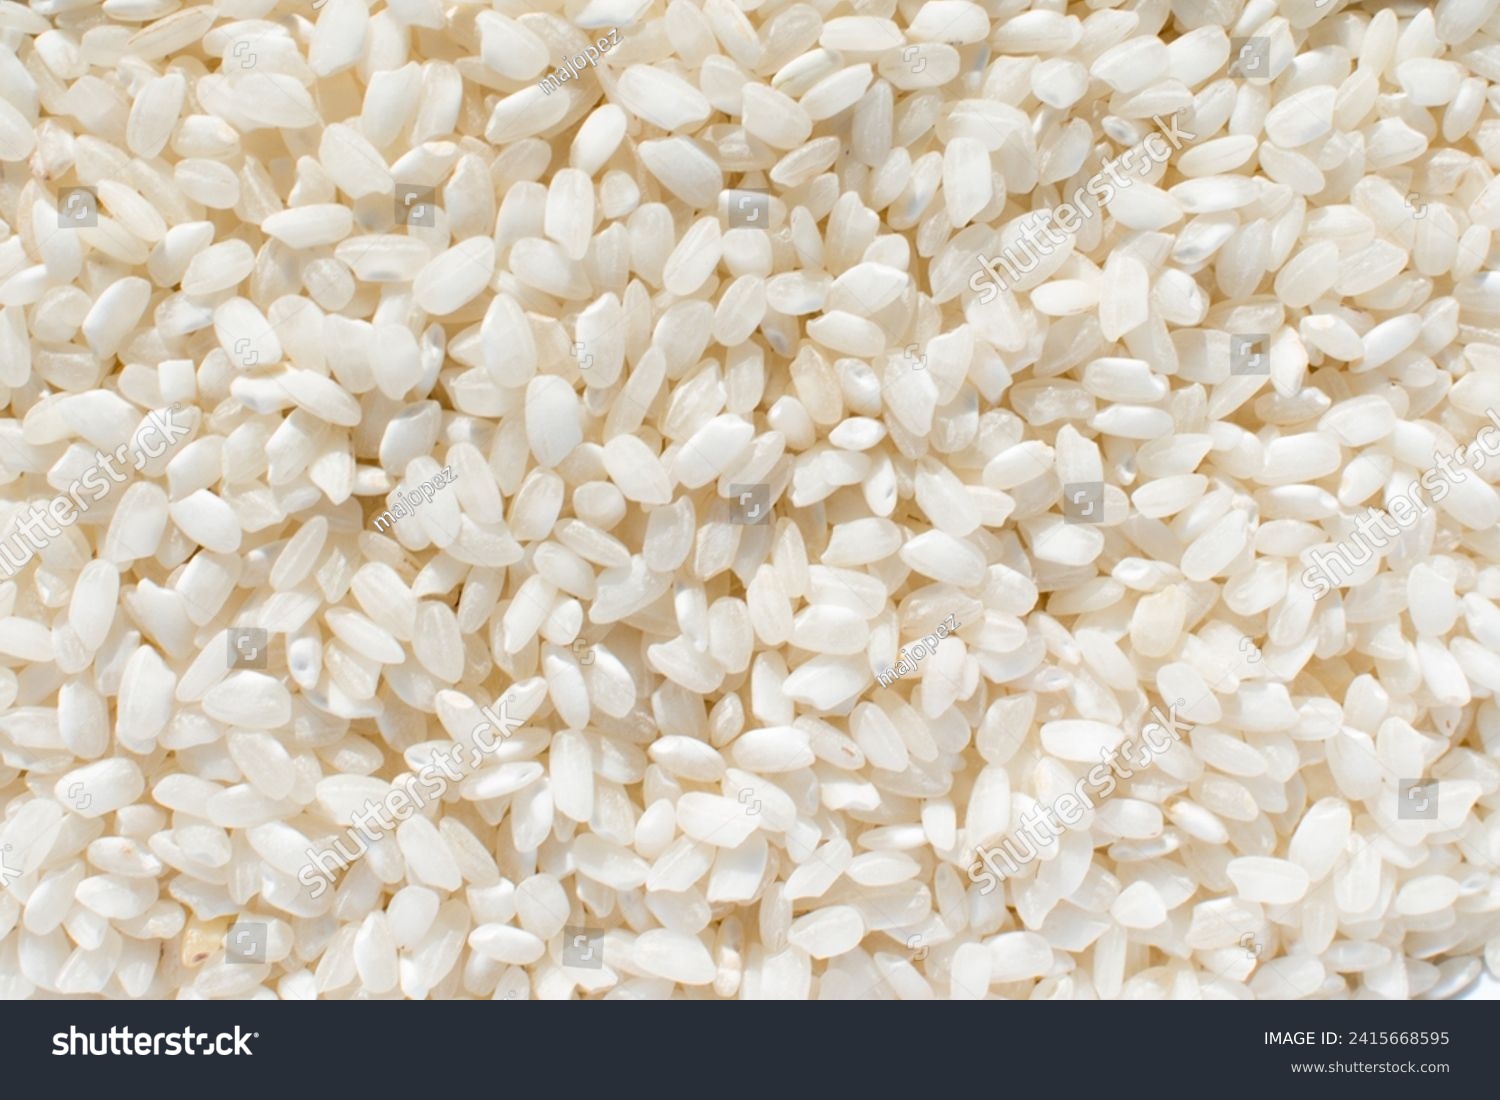 Uncooked organic white rice, background. Carbohydrate - food type  #2415668595